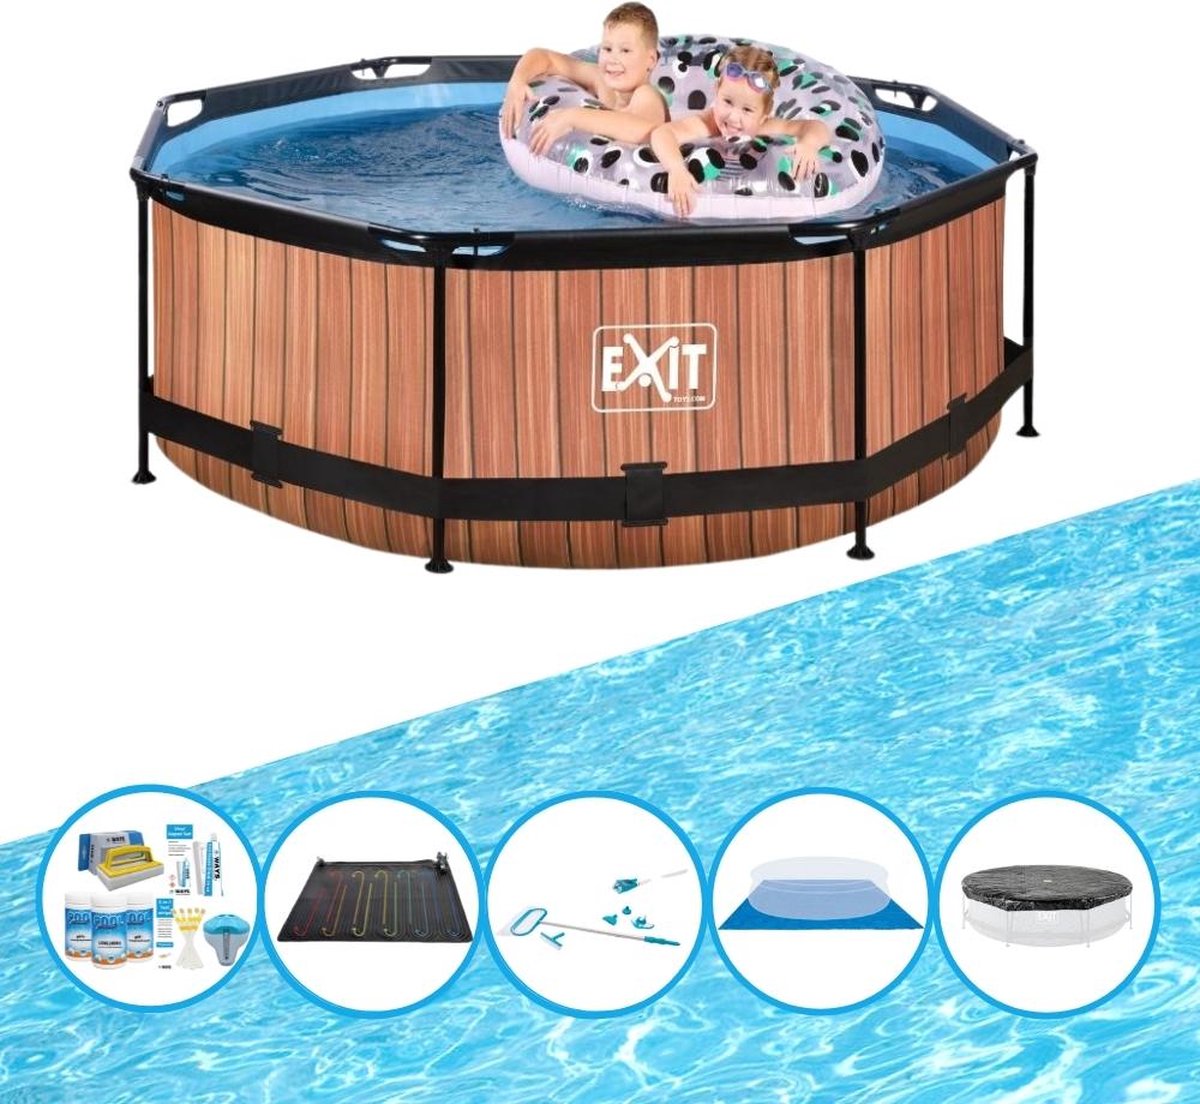 EXIT Toys Exit Zwembad Timber Style - Frame Pool ø244x76cm - Inclusief Bijbehorende Accessoires - Bruin